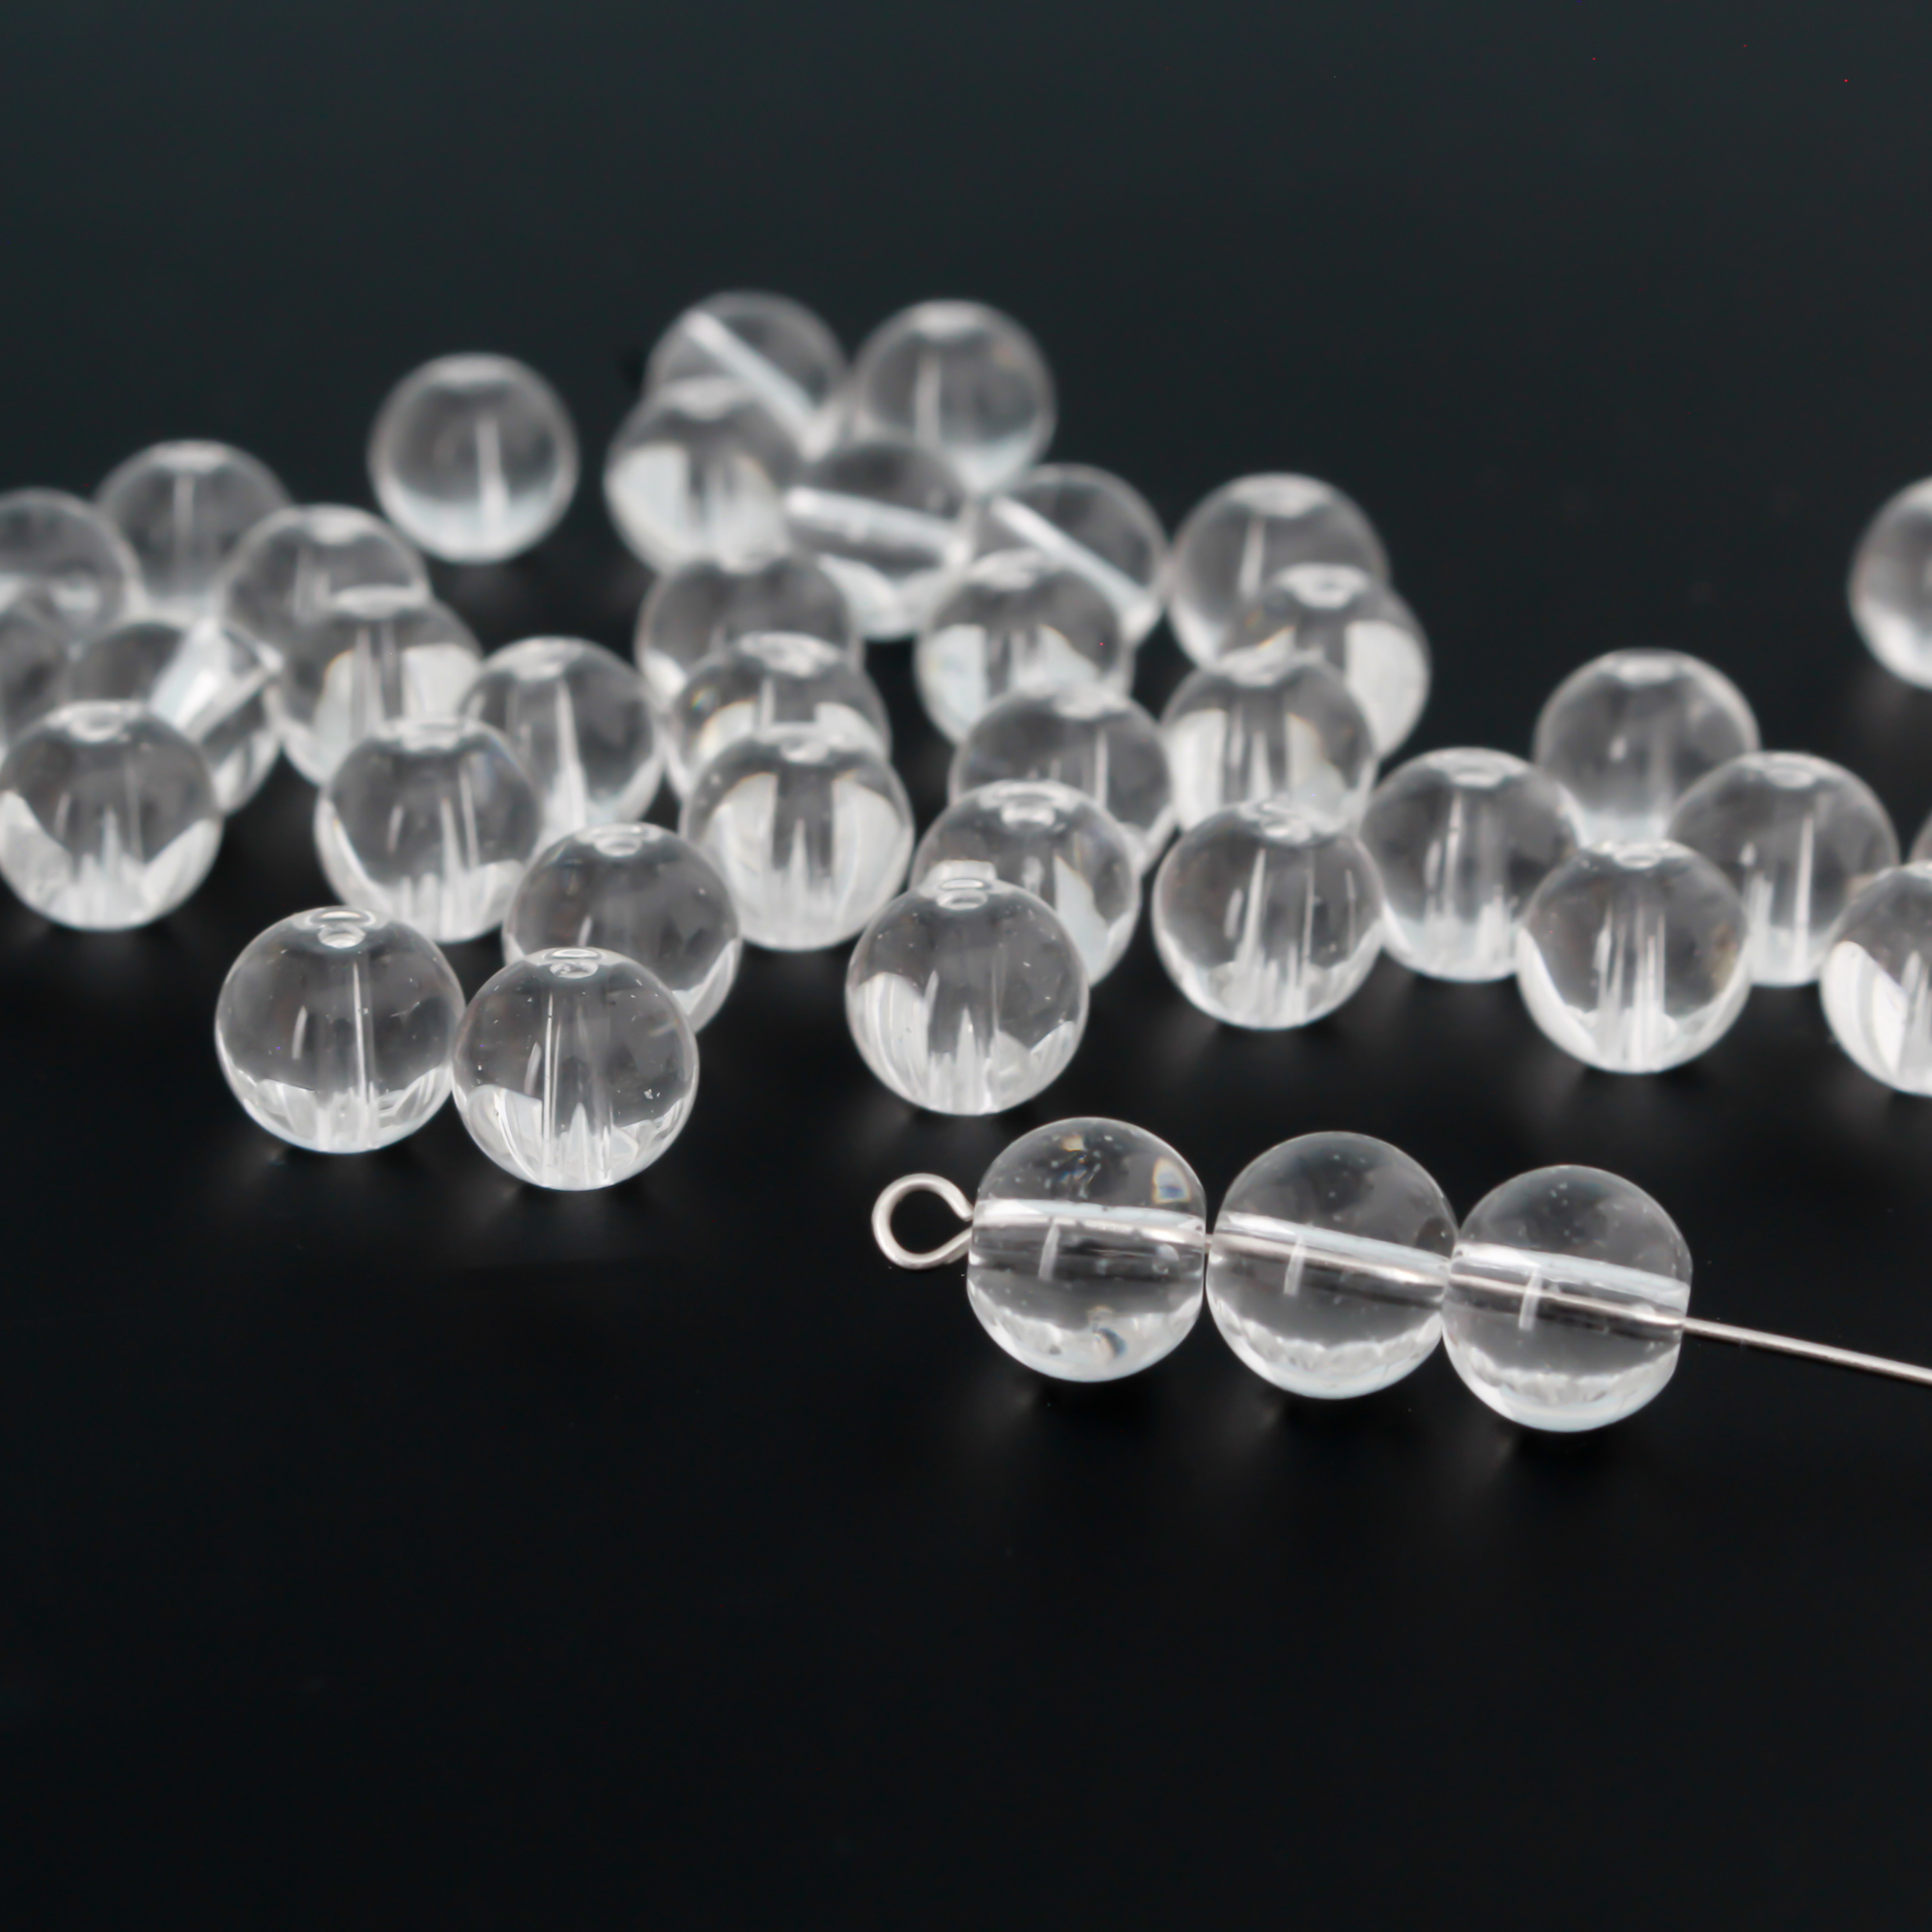 8mm round clear transparent glass beads.